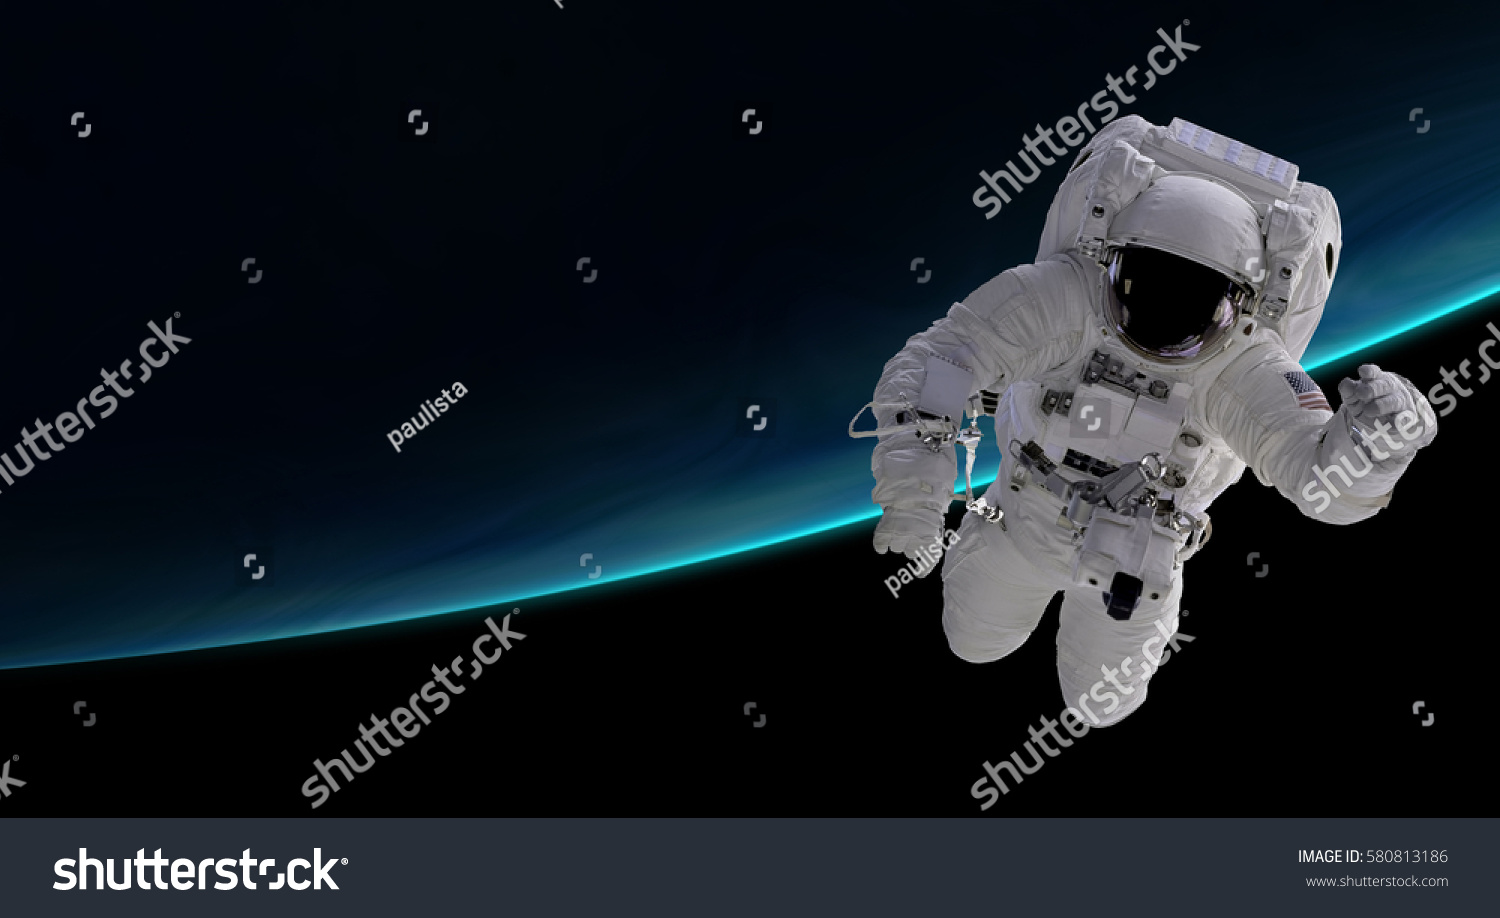 astronaut orbiting the blue planet, 3d illustration - elements of this image furnished by NASA #580813186